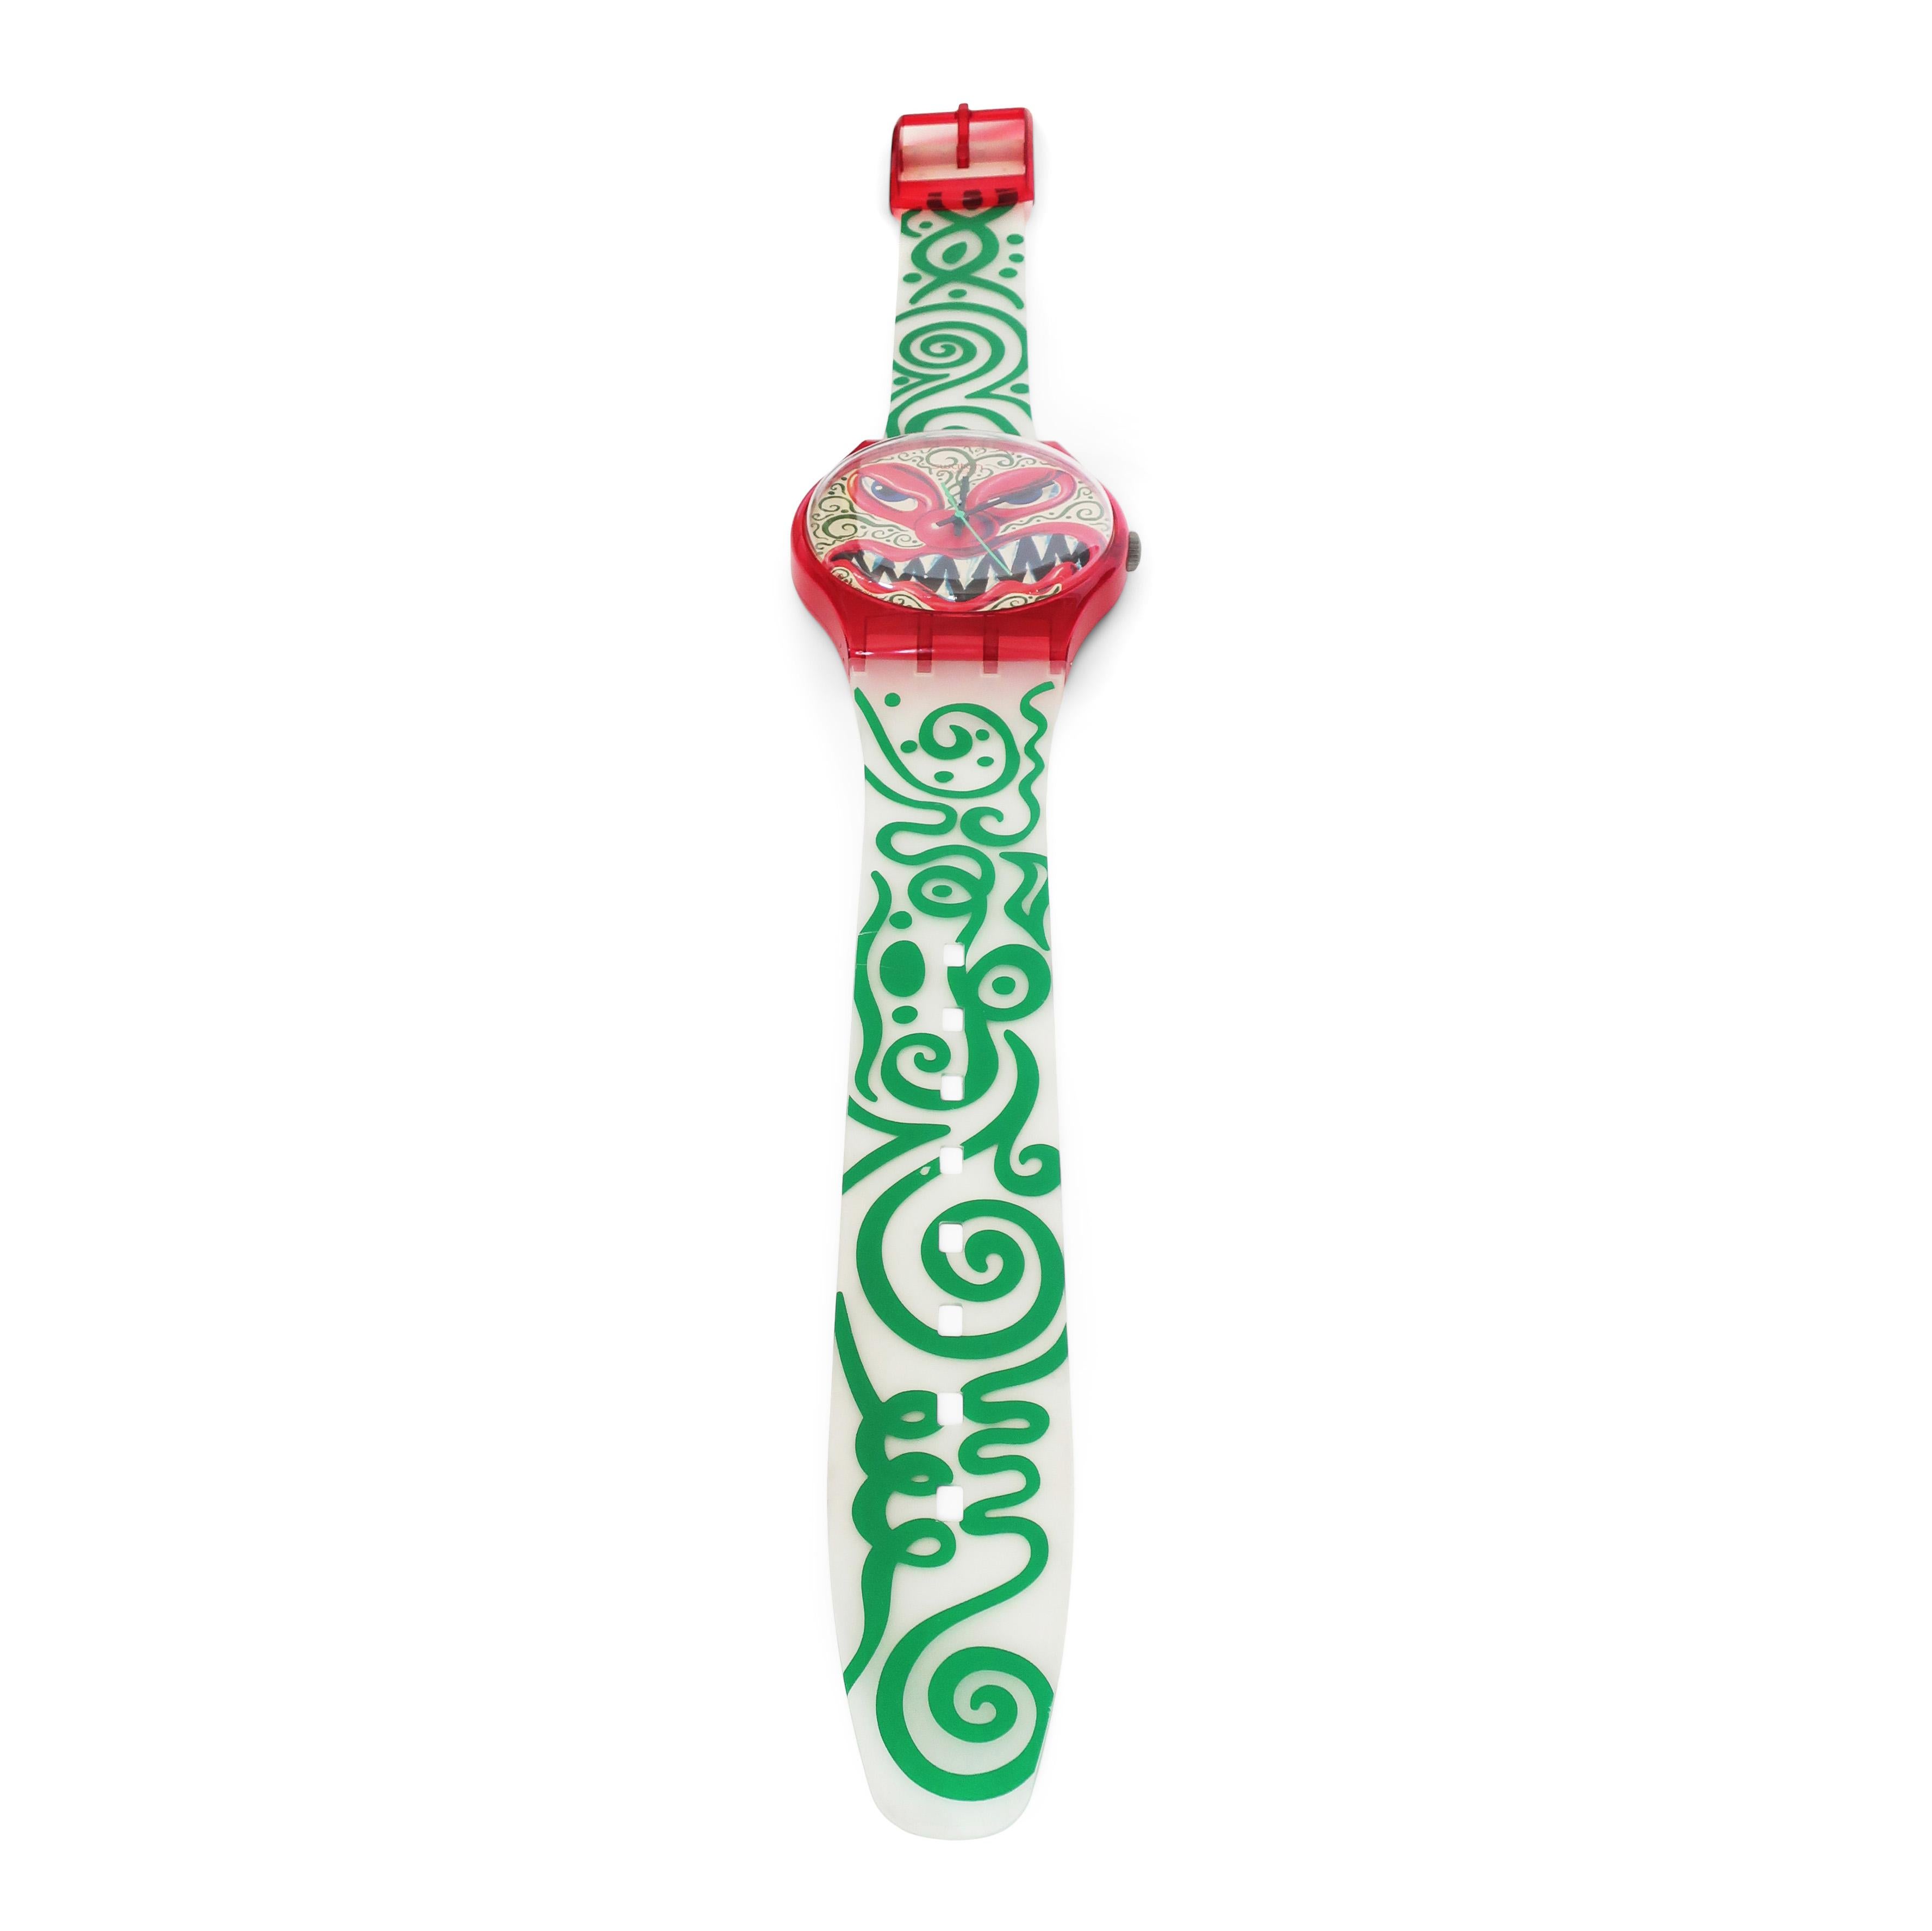 1993 “Monster Time” Wristwatch Wall Clock by Kenny Scharf for Swatch  1